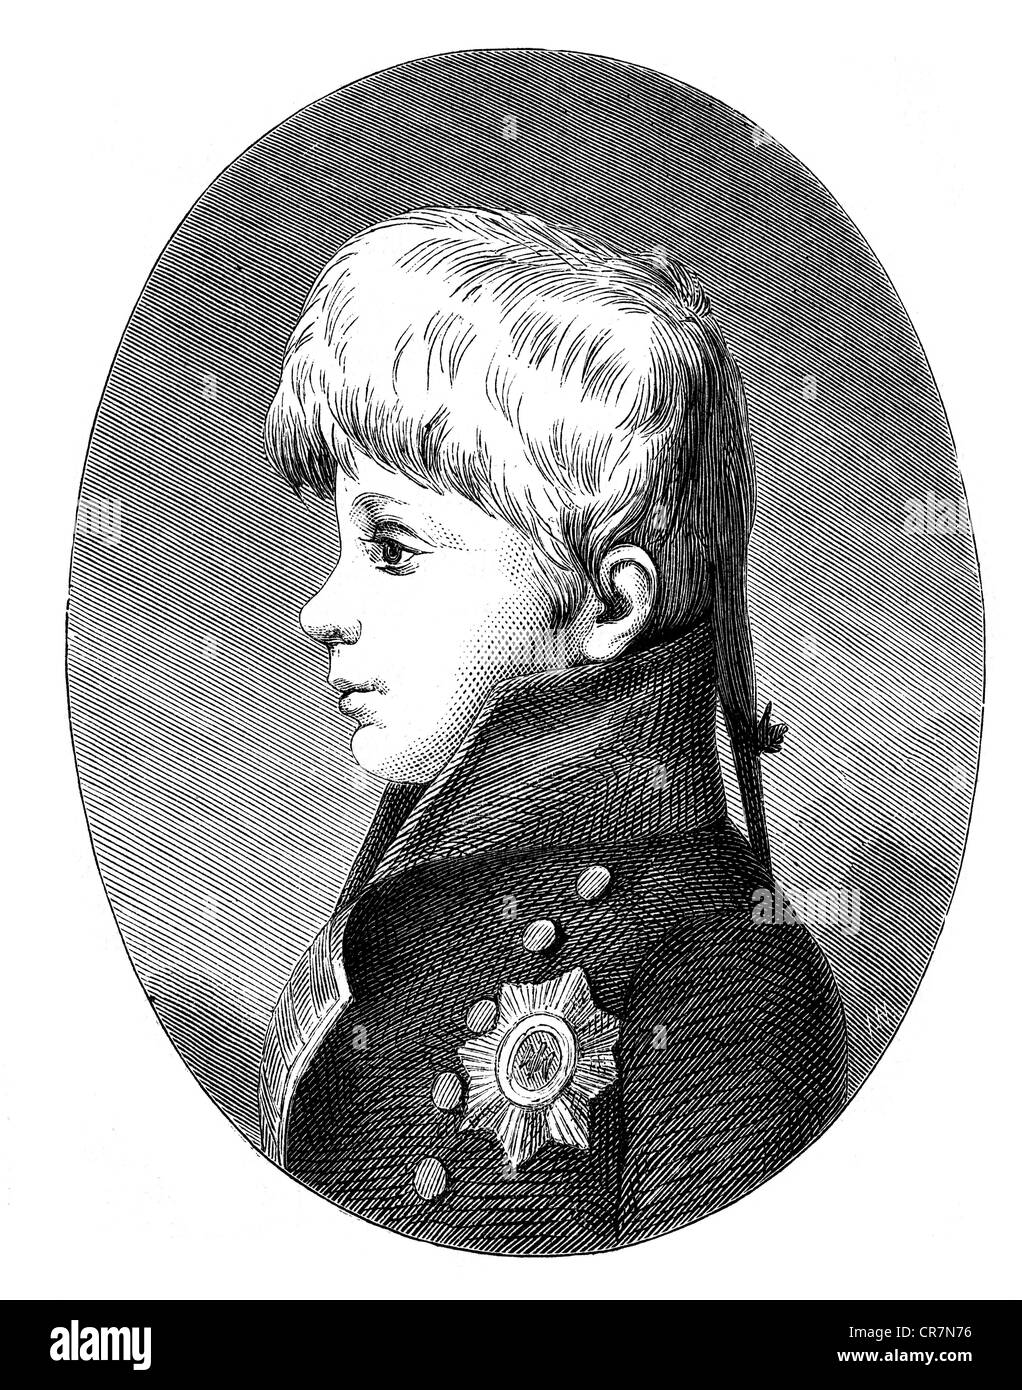 Frederick William IV, 15.10.1795 - 2.1.1861, King of Prussia 7.6.1840 - 26.10.1858, 10 years old, 1806, portrait, wood engraving, 19th century, Stock Photo